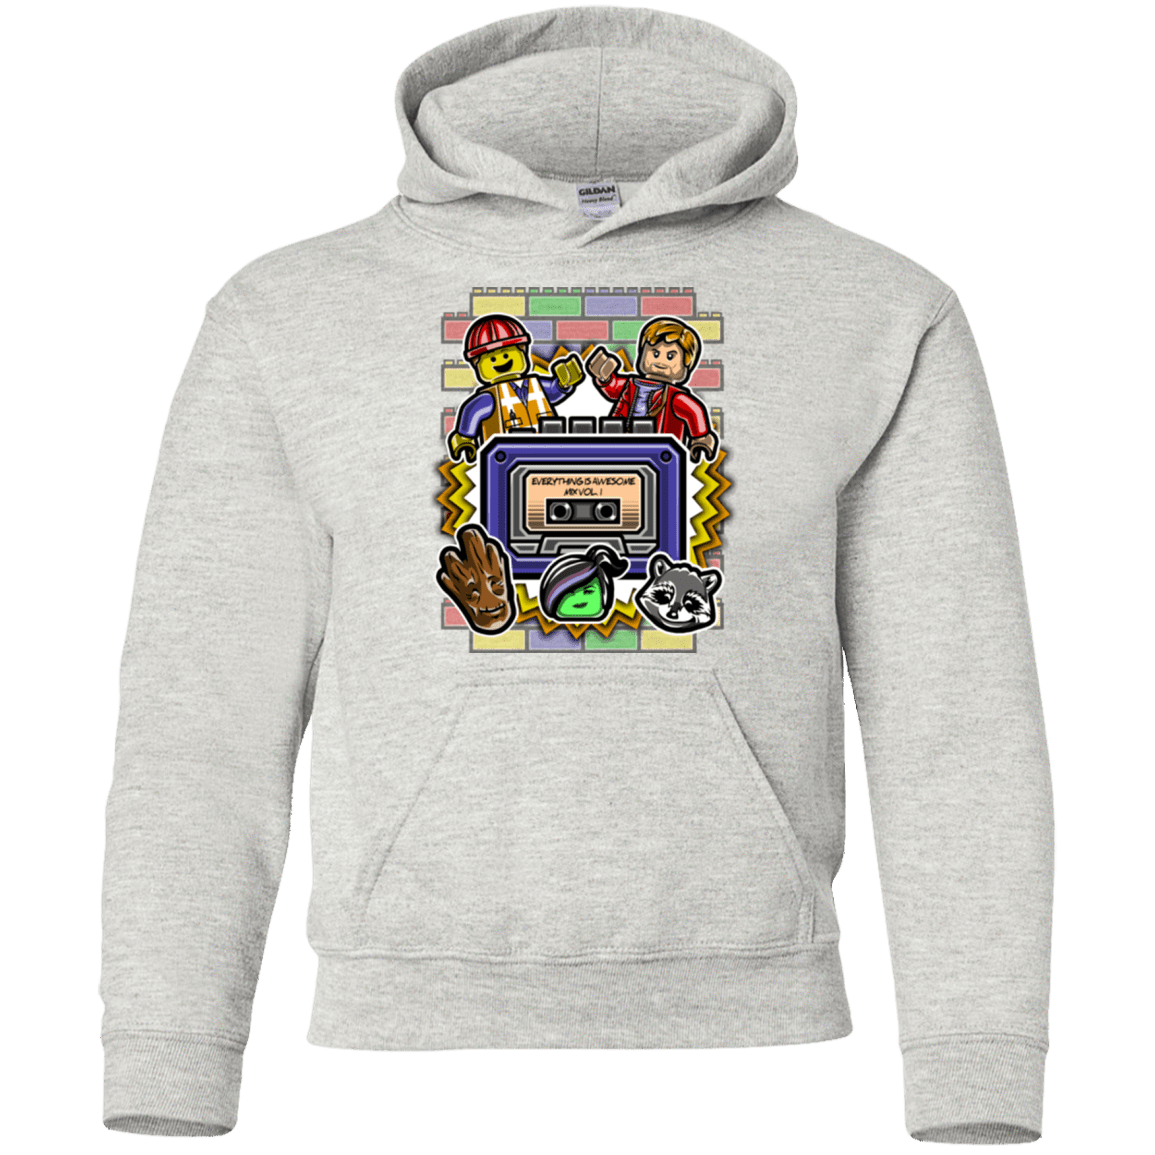 Sweatshirts Ash / YS Everything is awesome mix Youth Hoodie